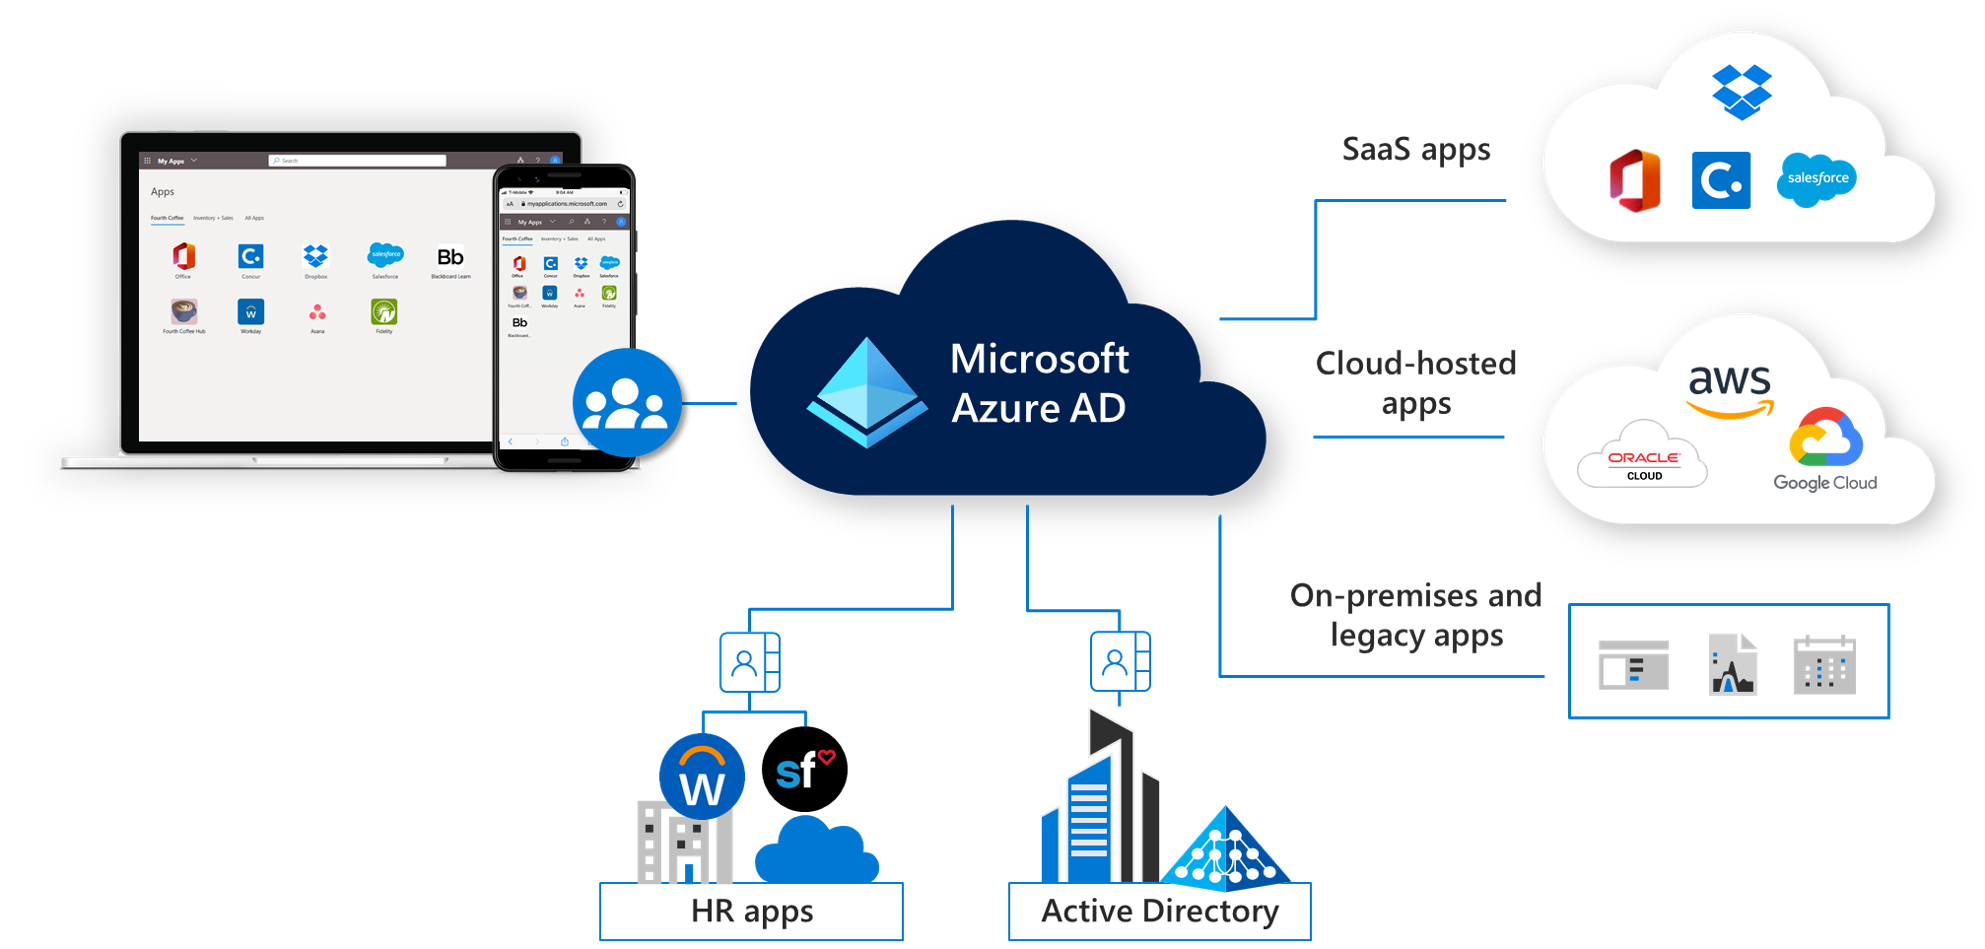 Azure Active Directory Premium P1 is coming to Microsoft 365 Business